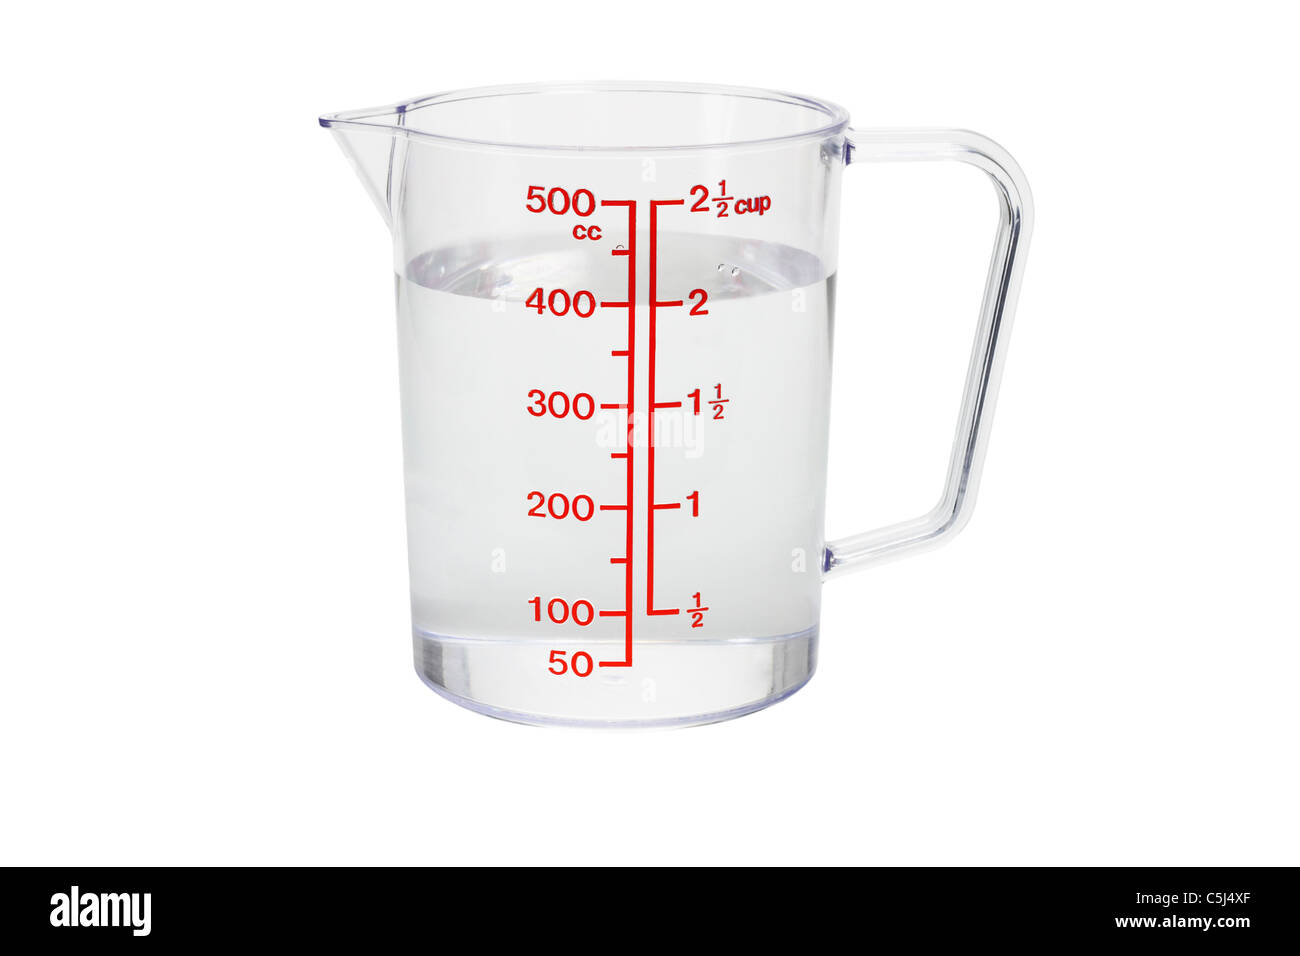 Measuring cup and water Cut Out Stock Images & Pictures - Alamy